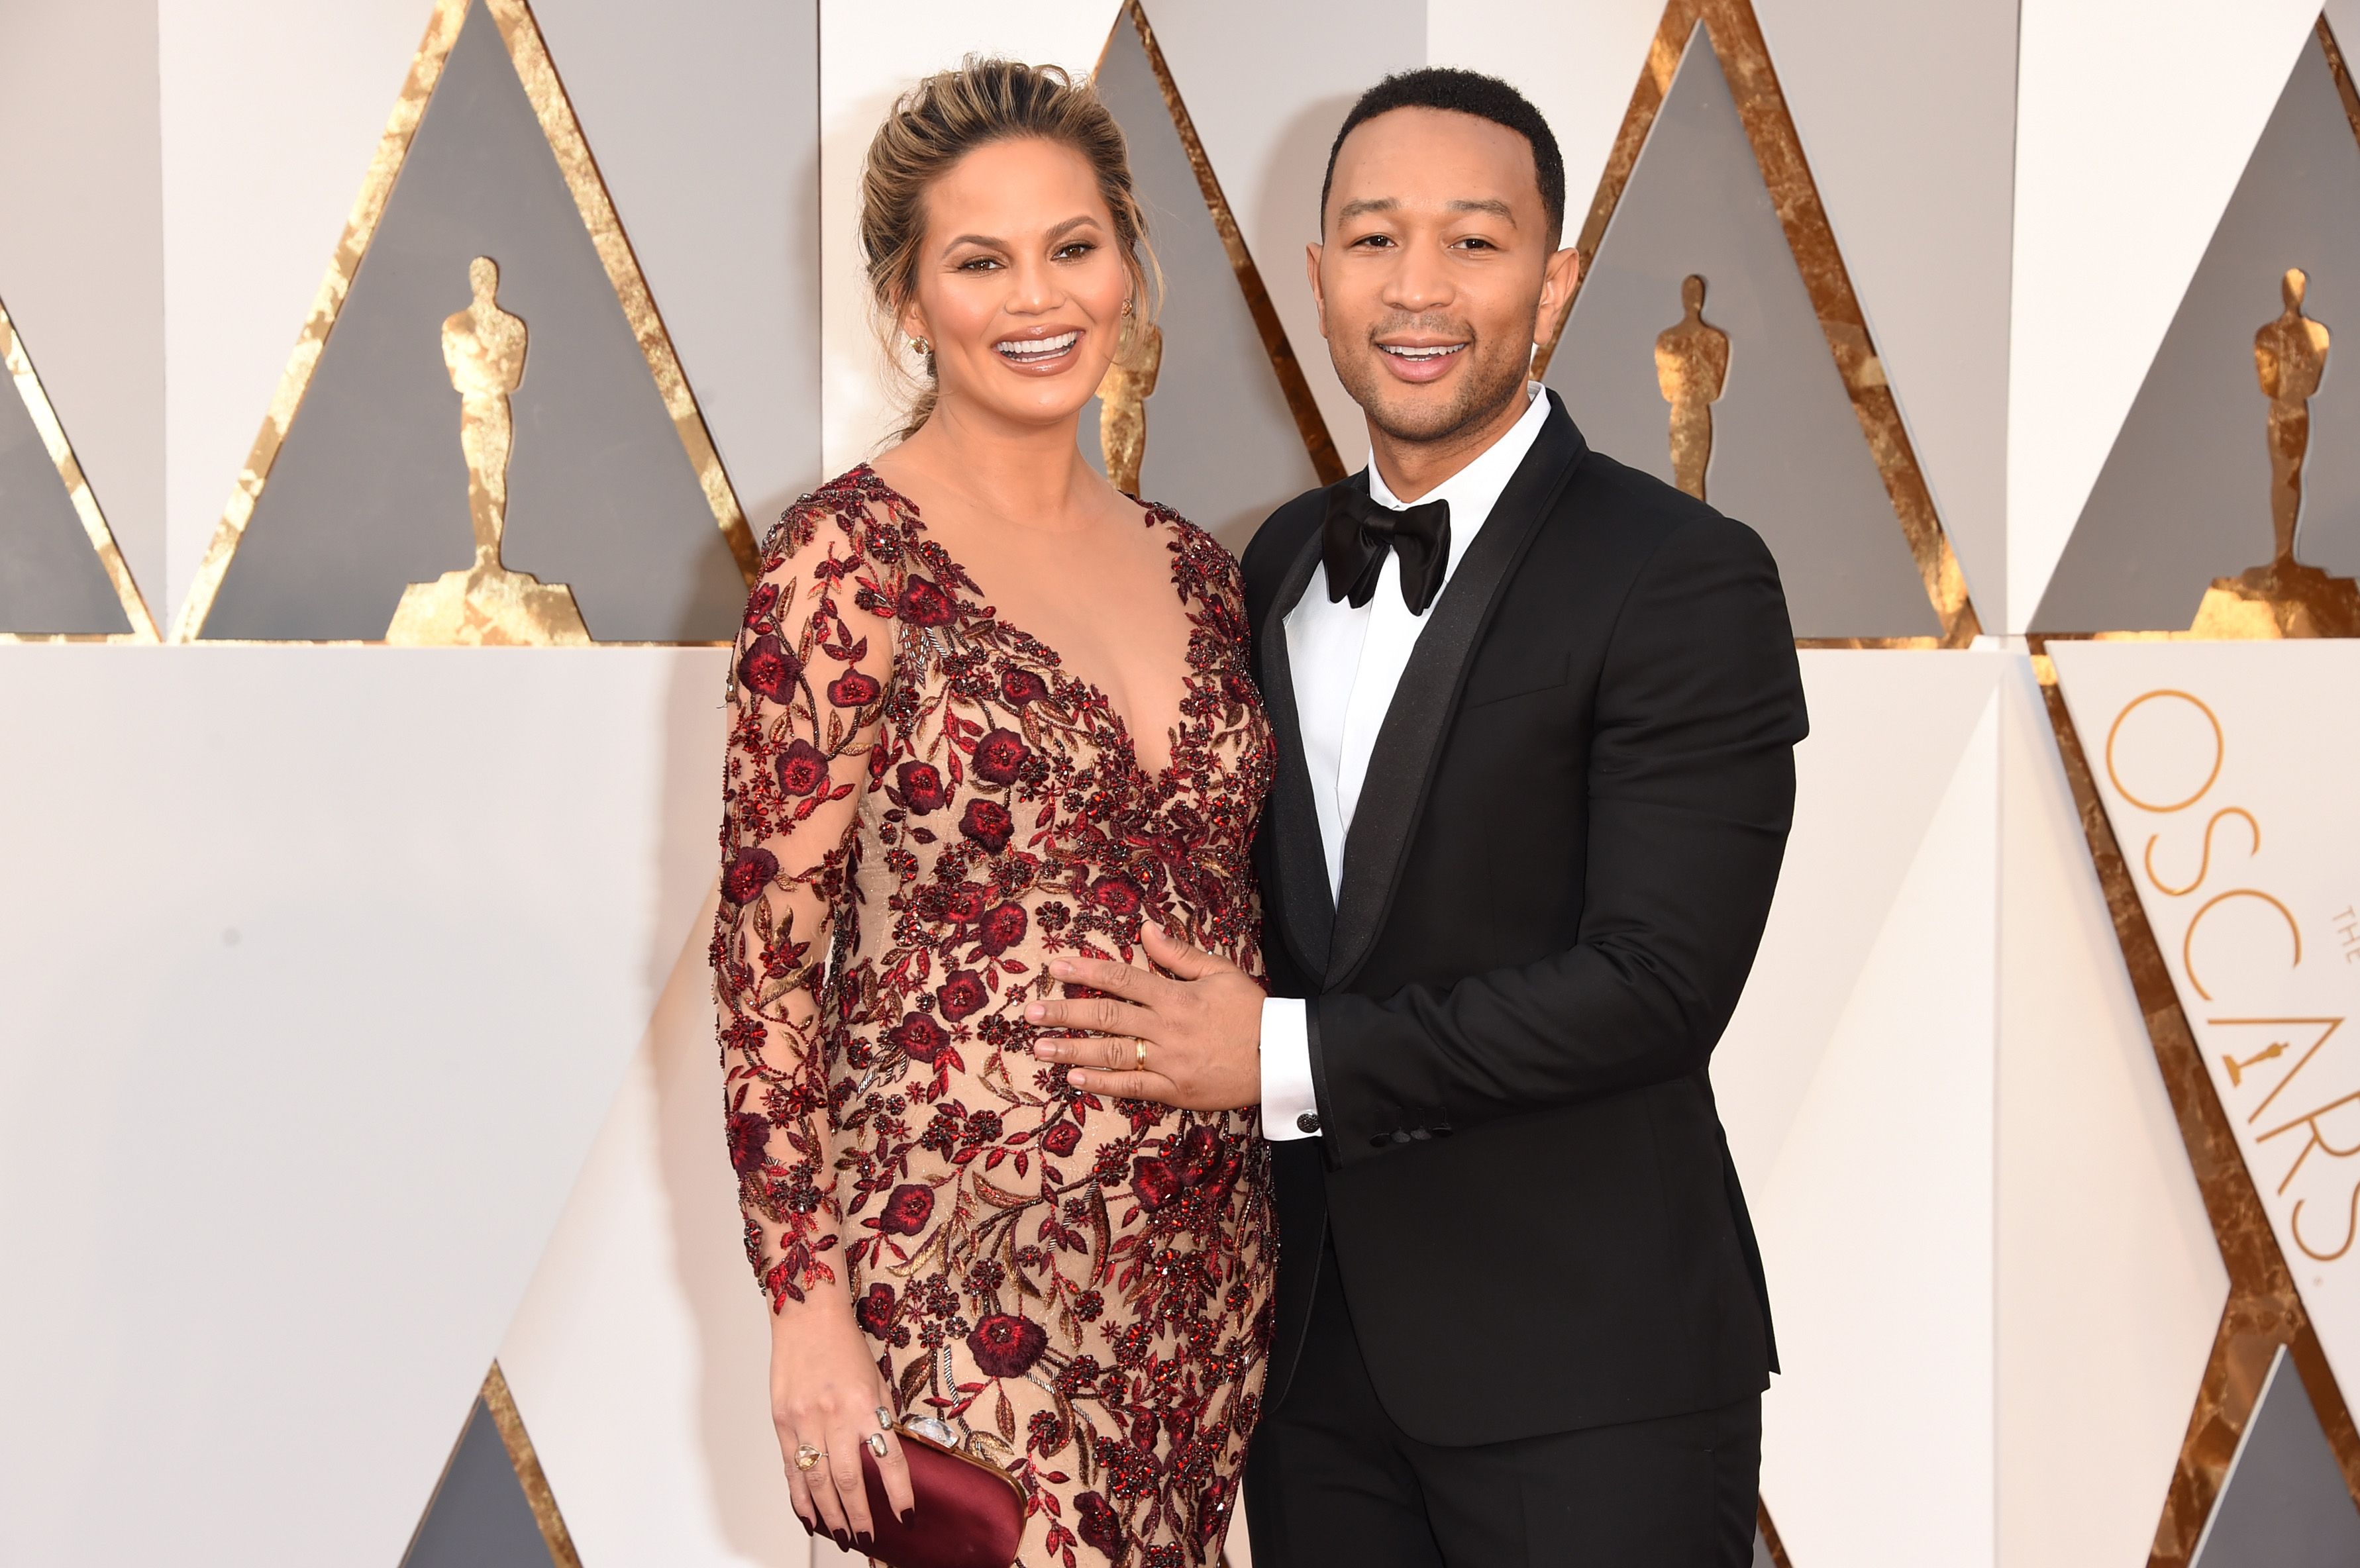 Chrissy Teigen and John Legend attend the 88th Annual Academy Awards at Hollywood & Highland Center on February 28, 2016 in California. | Photo: Getty Images.